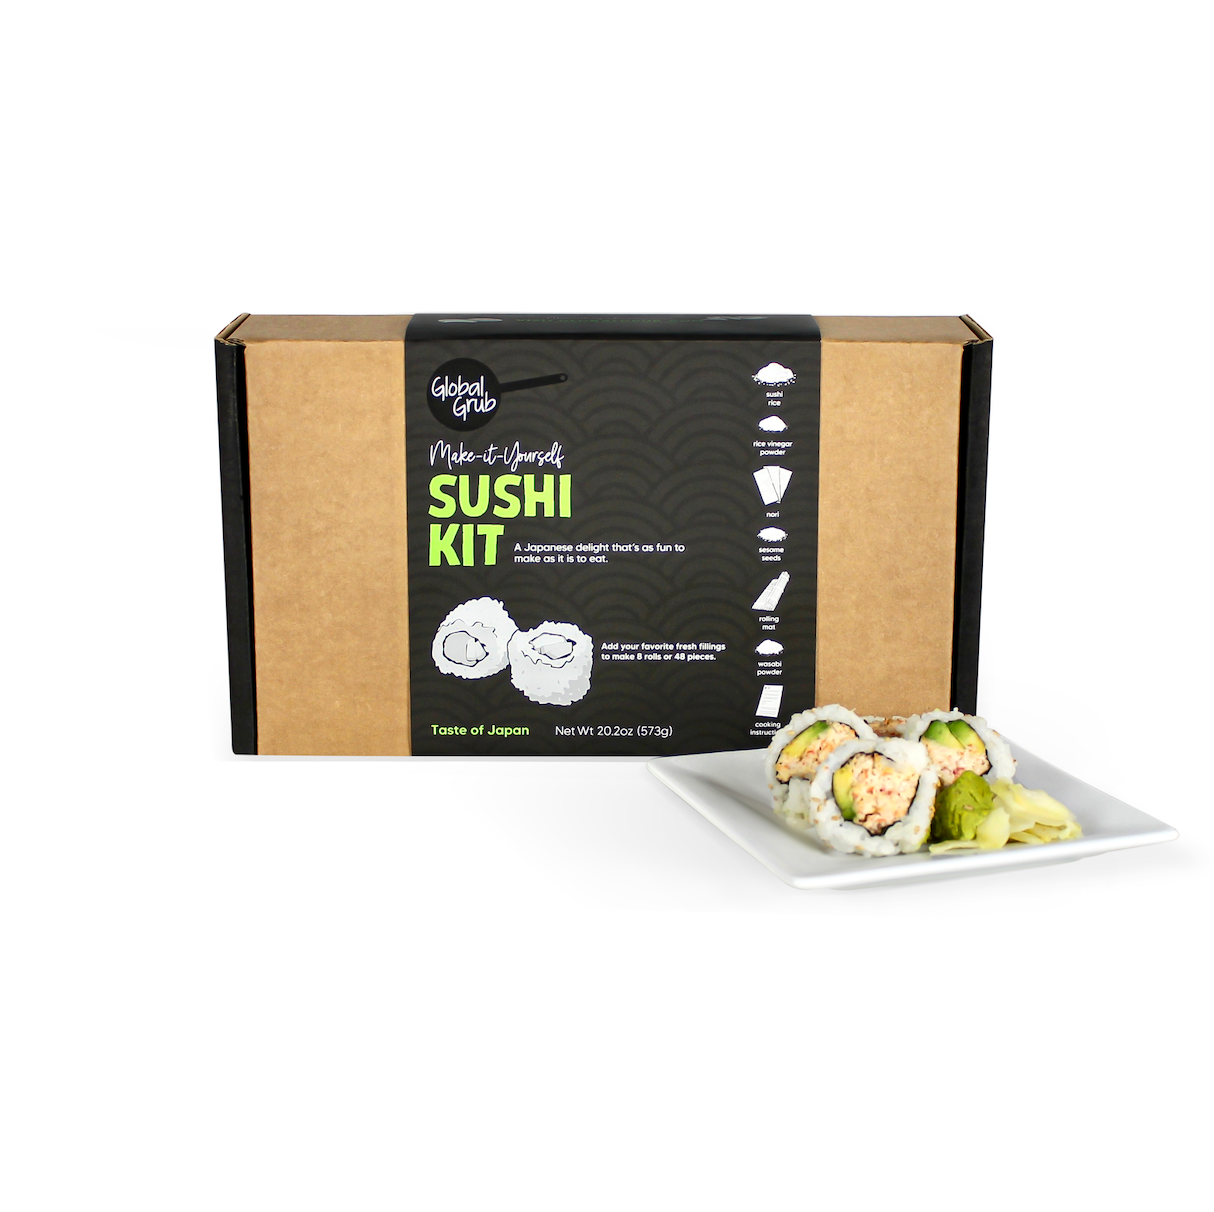 Sushi Kit for your next cooking adventure